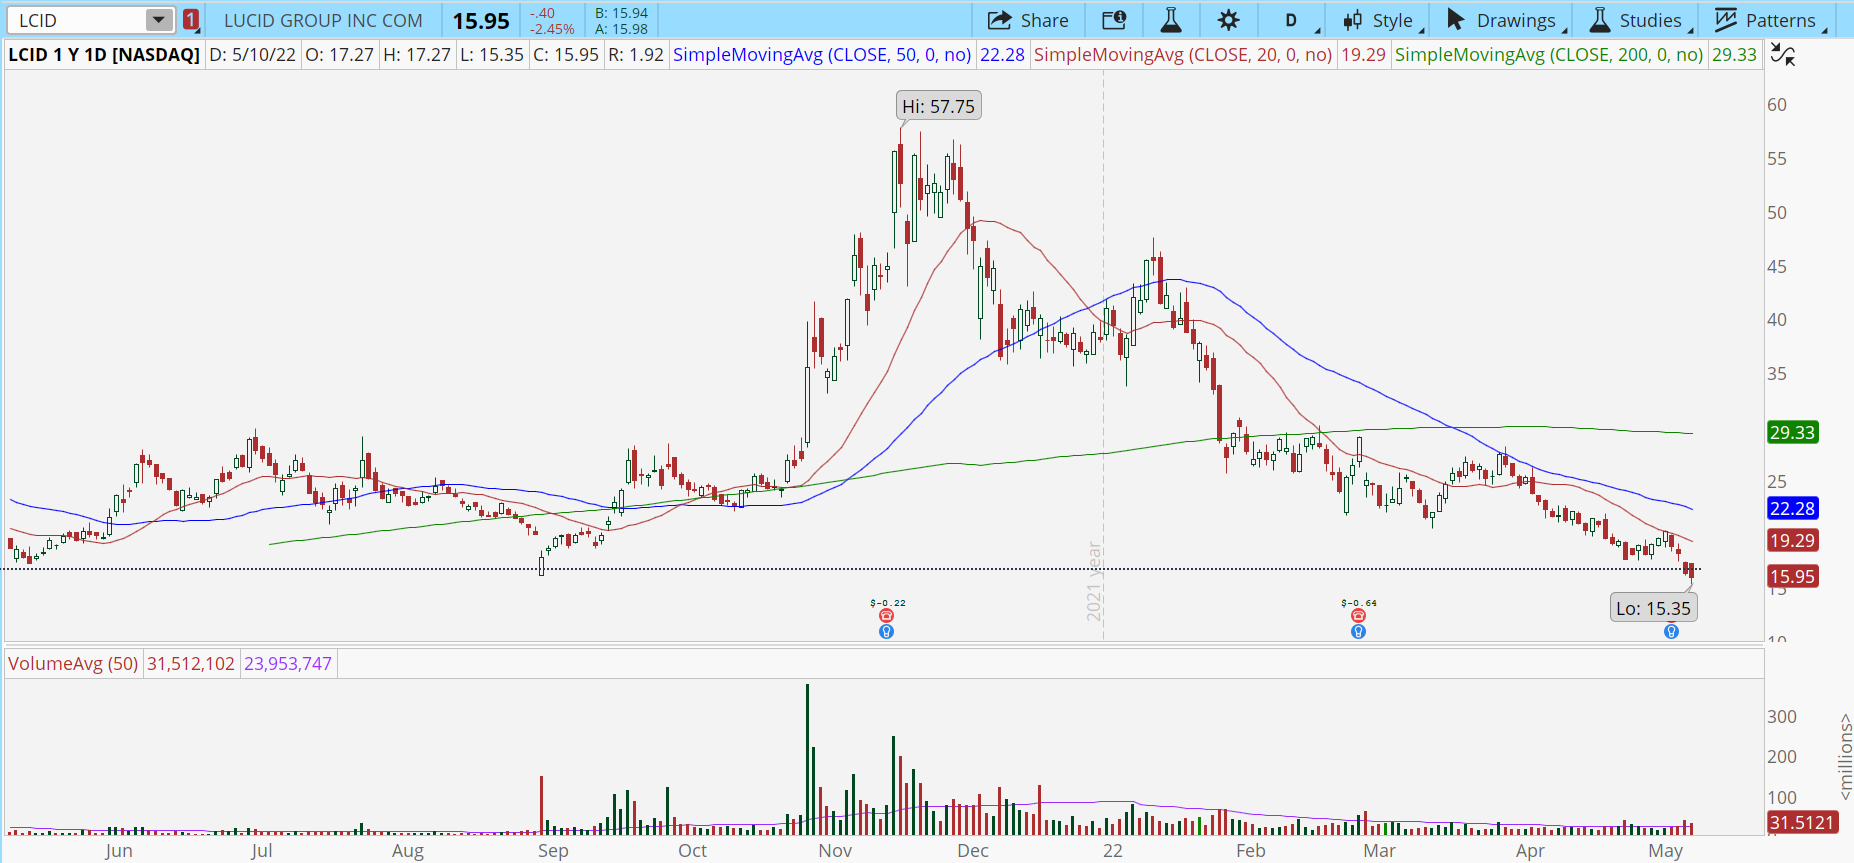 Lucid (LCID) stock chart with steep downtrend and major support break.